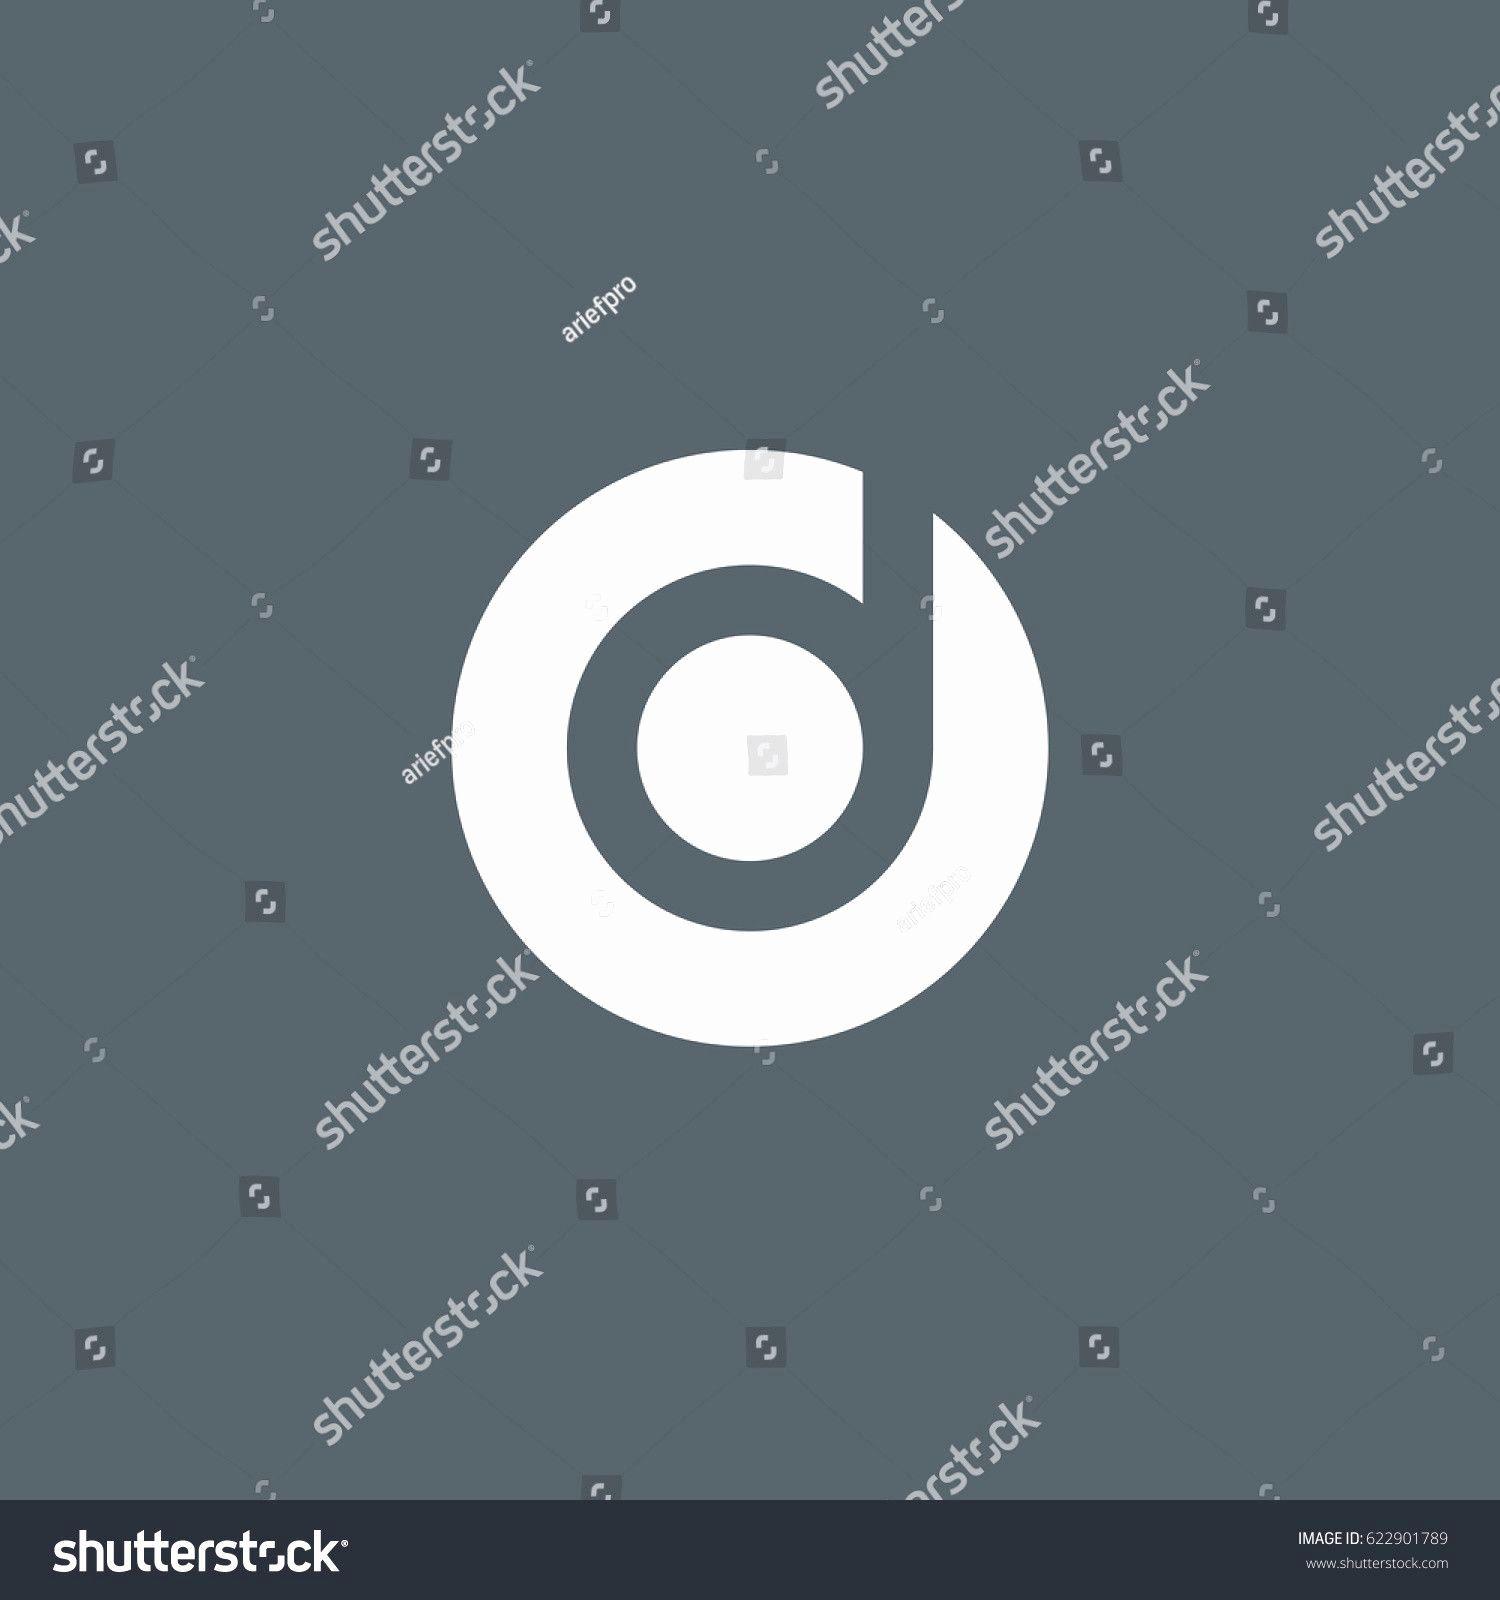 Awesome D Logo - Whatsapp Logo Vector Awesome Best Initial D Wallpaper iPhone 6